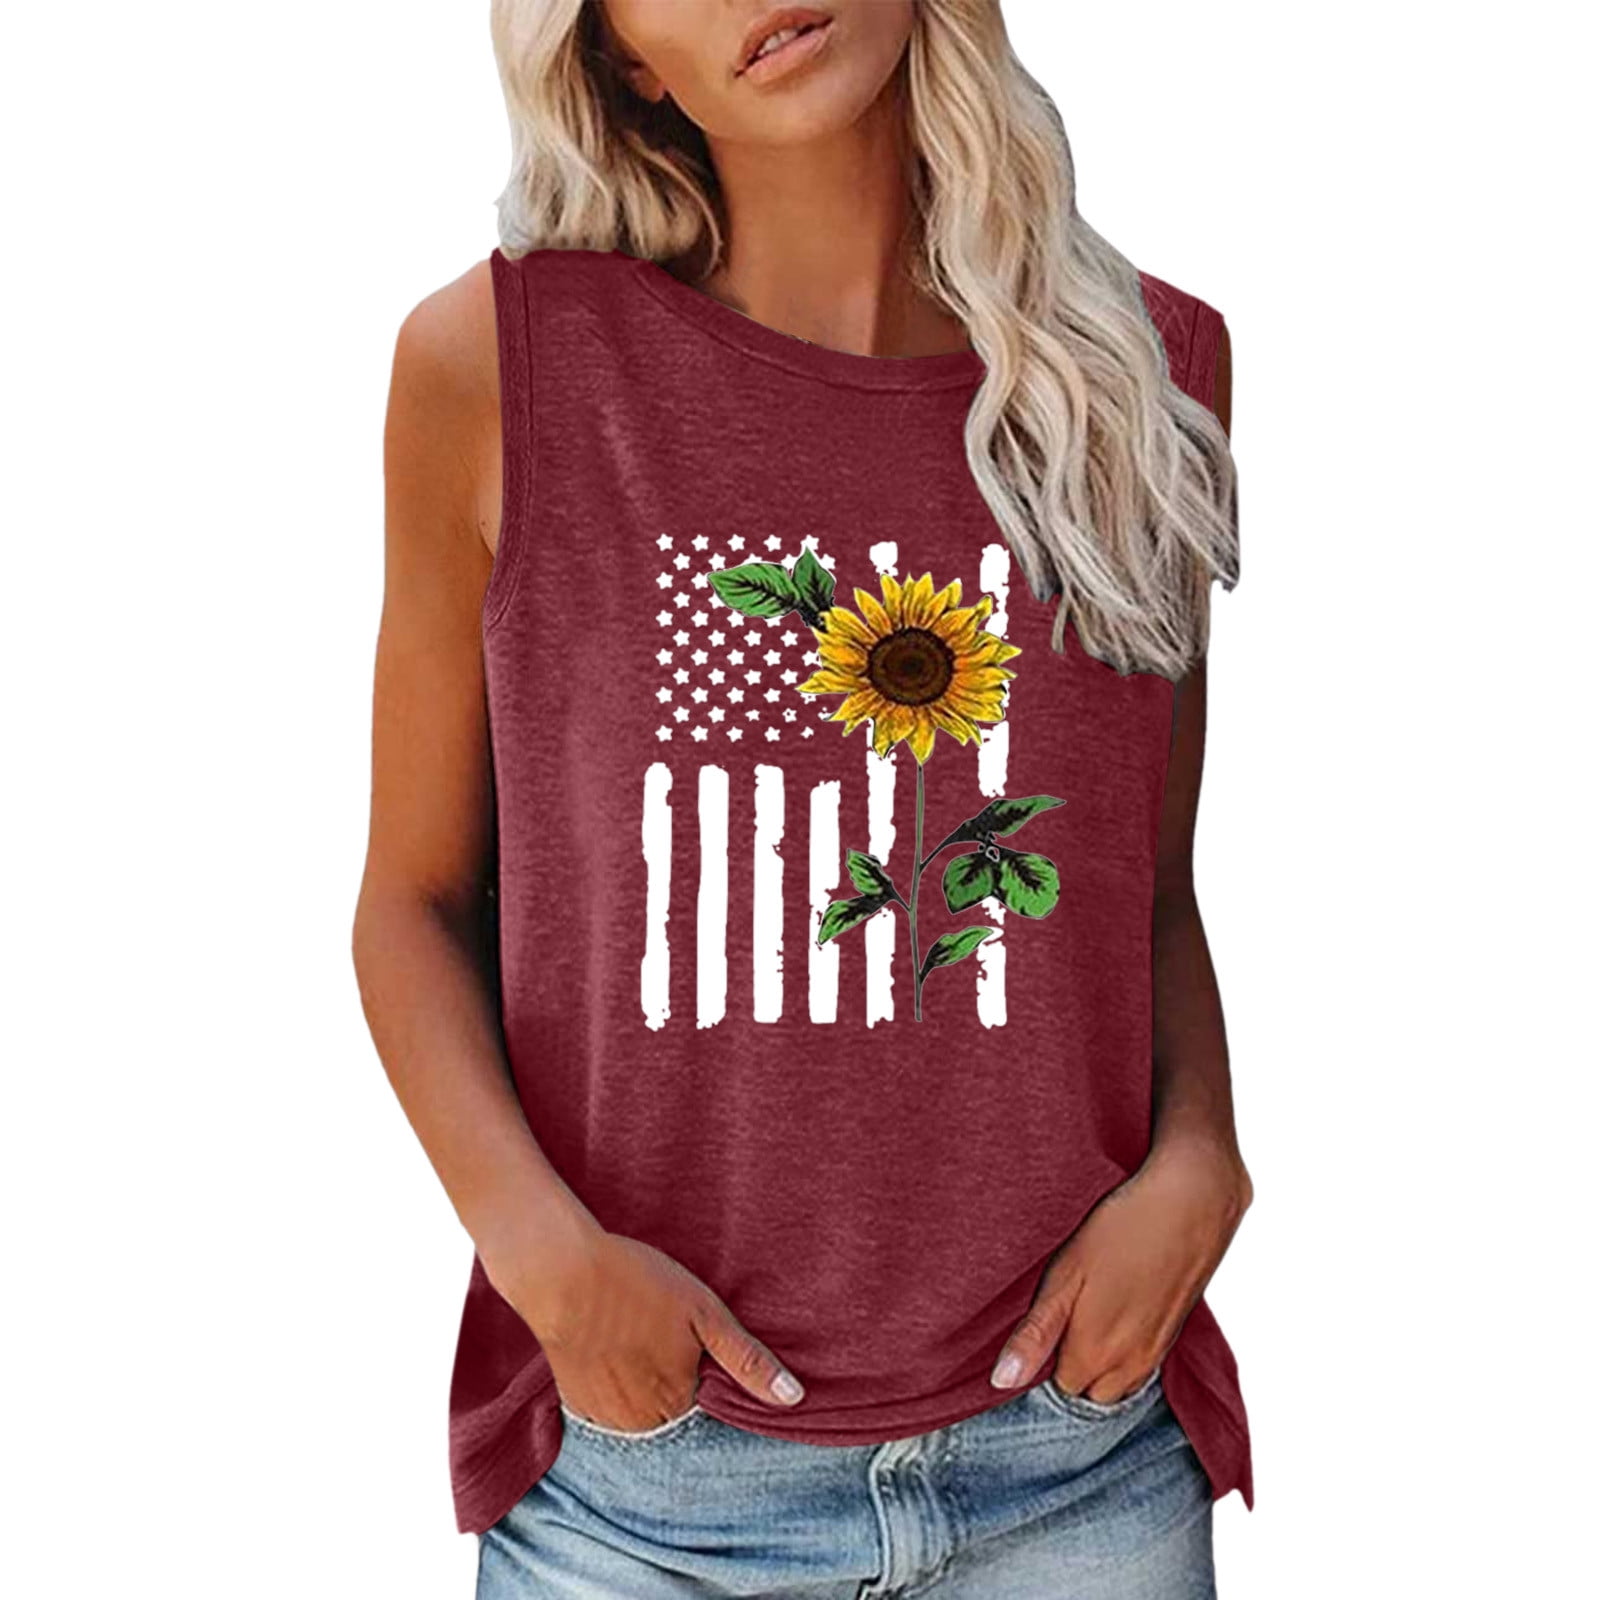 cute tops cute summer shirts distressed tank vintage tank top western tank Sunflower bleached tank top for women work out tank top